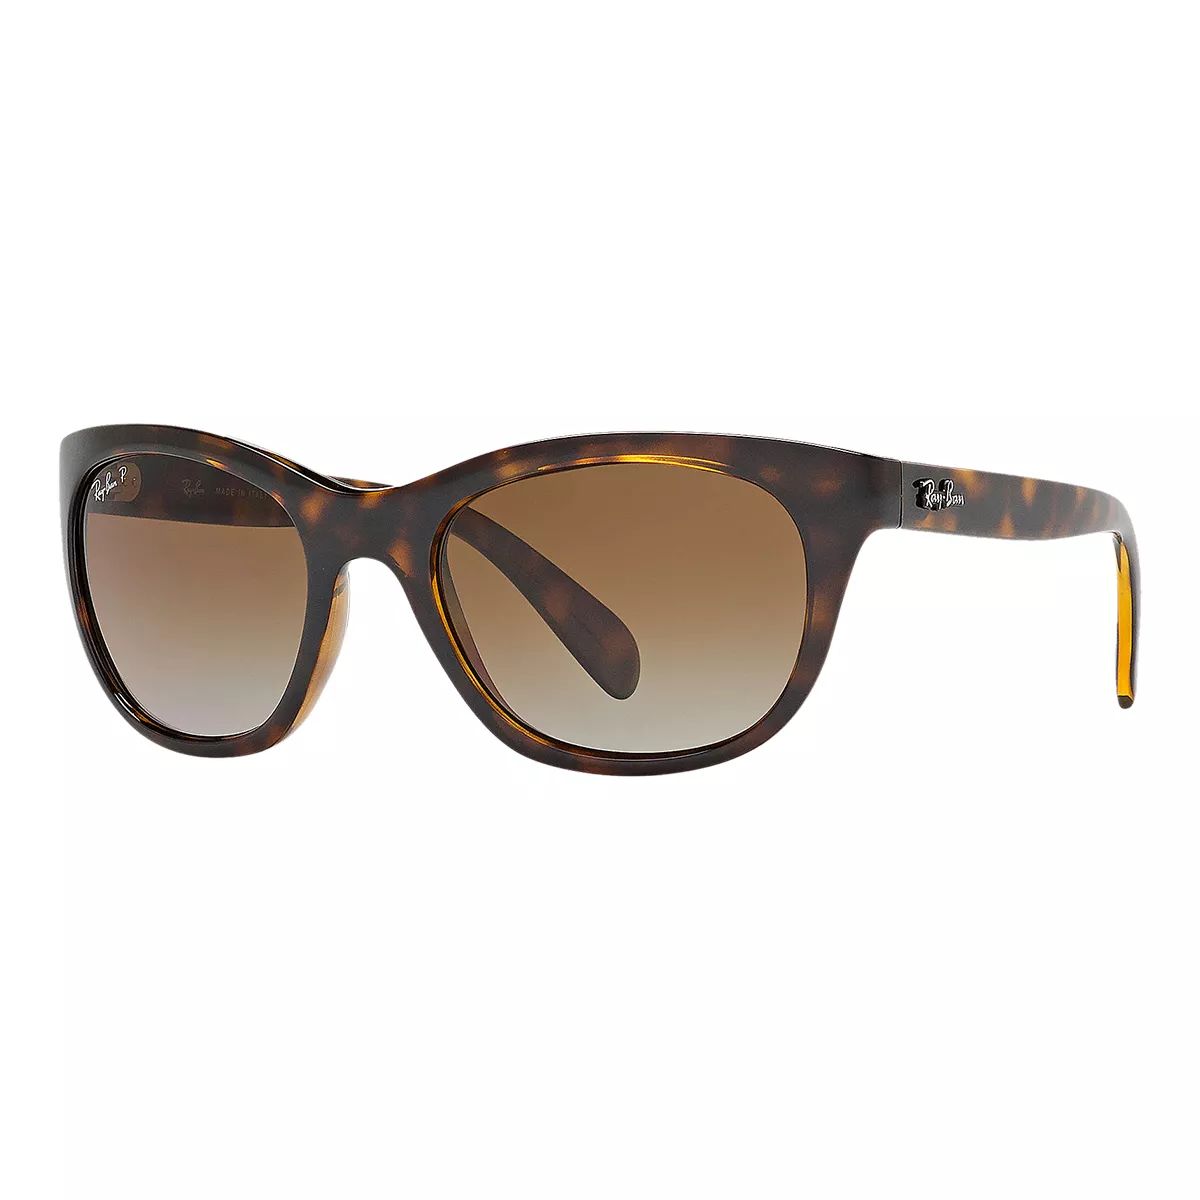 Image of Ray Ban Men's/Women's 4216 Butterfly Sunglasses Gradient